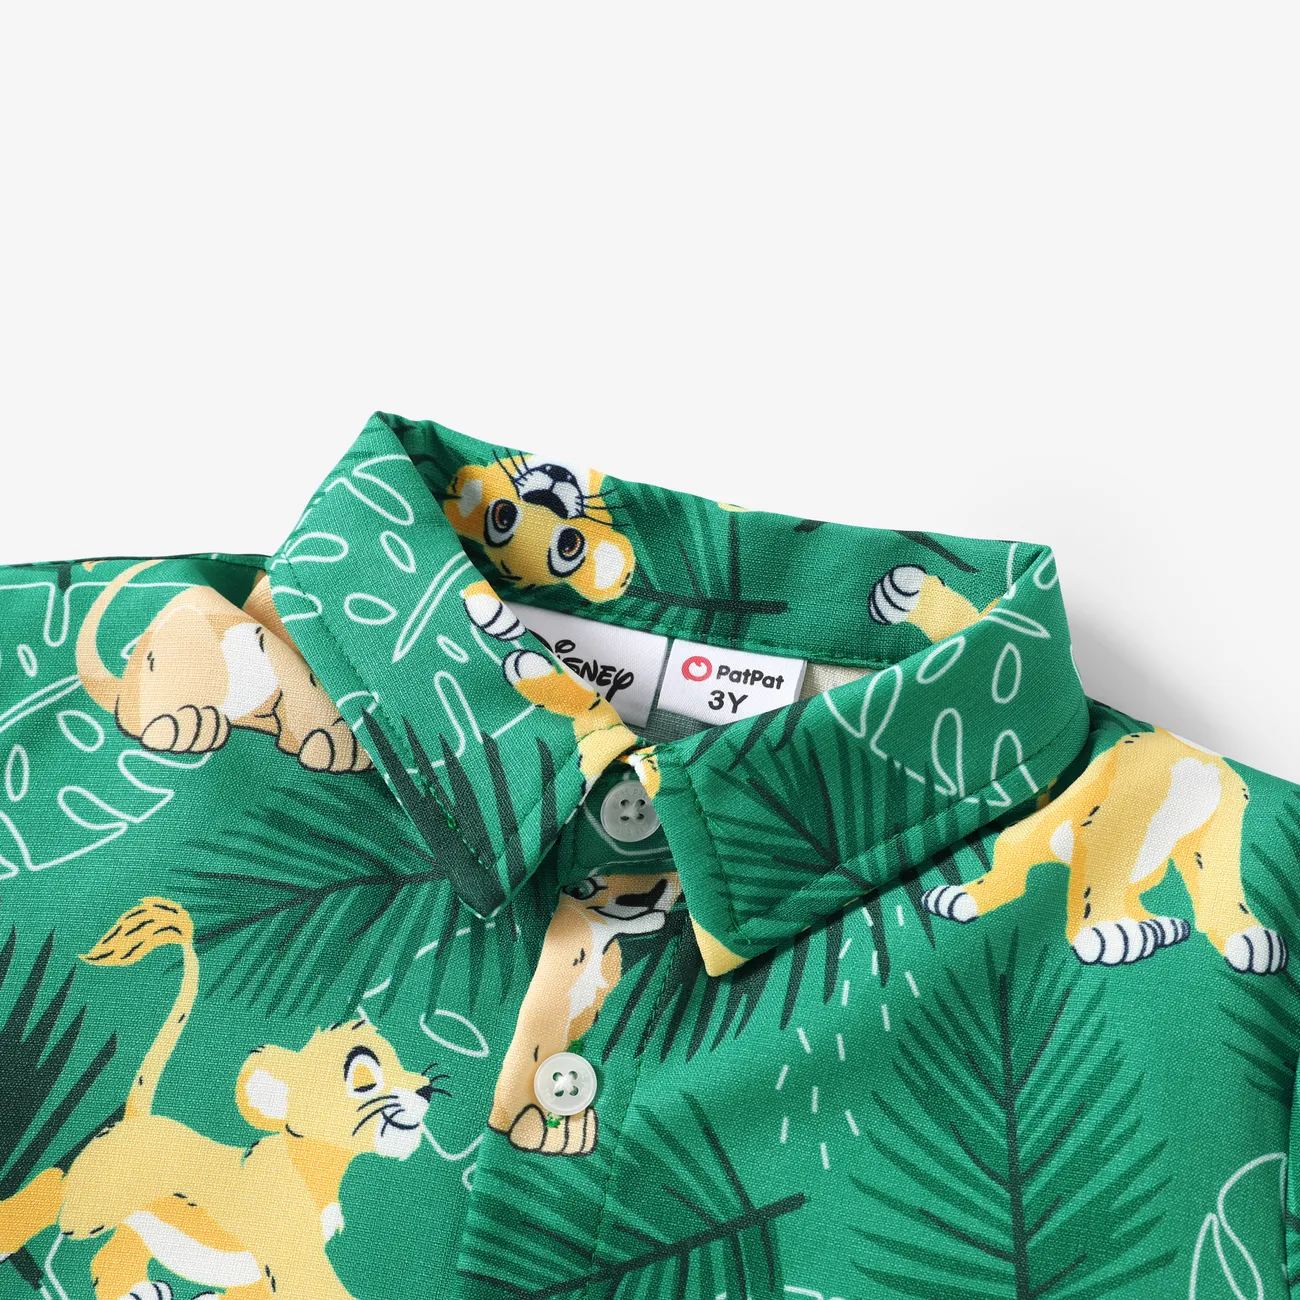 Disney Lion King Toddler Boys Simba 2pcs Tropical Plant Print Cotton Tee with Patch Embroidered Shorts Set Green big image 1